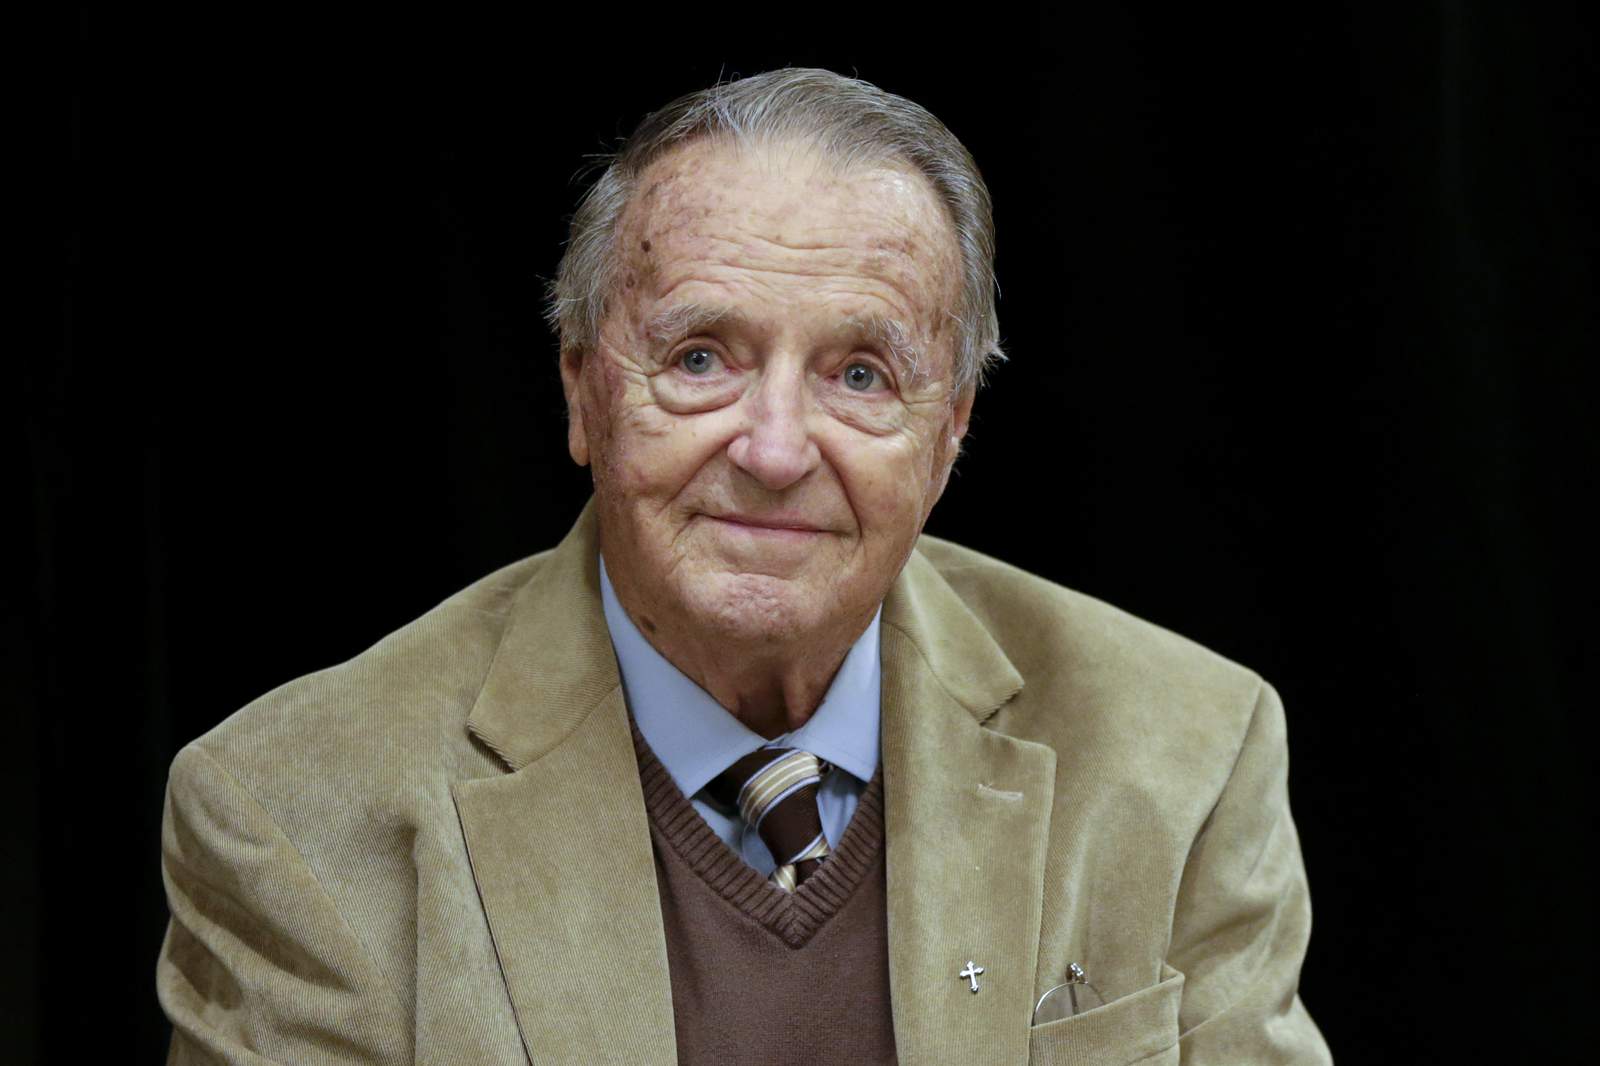 Former Florida State coach Bobby Bowden hospitalized with COVID-19